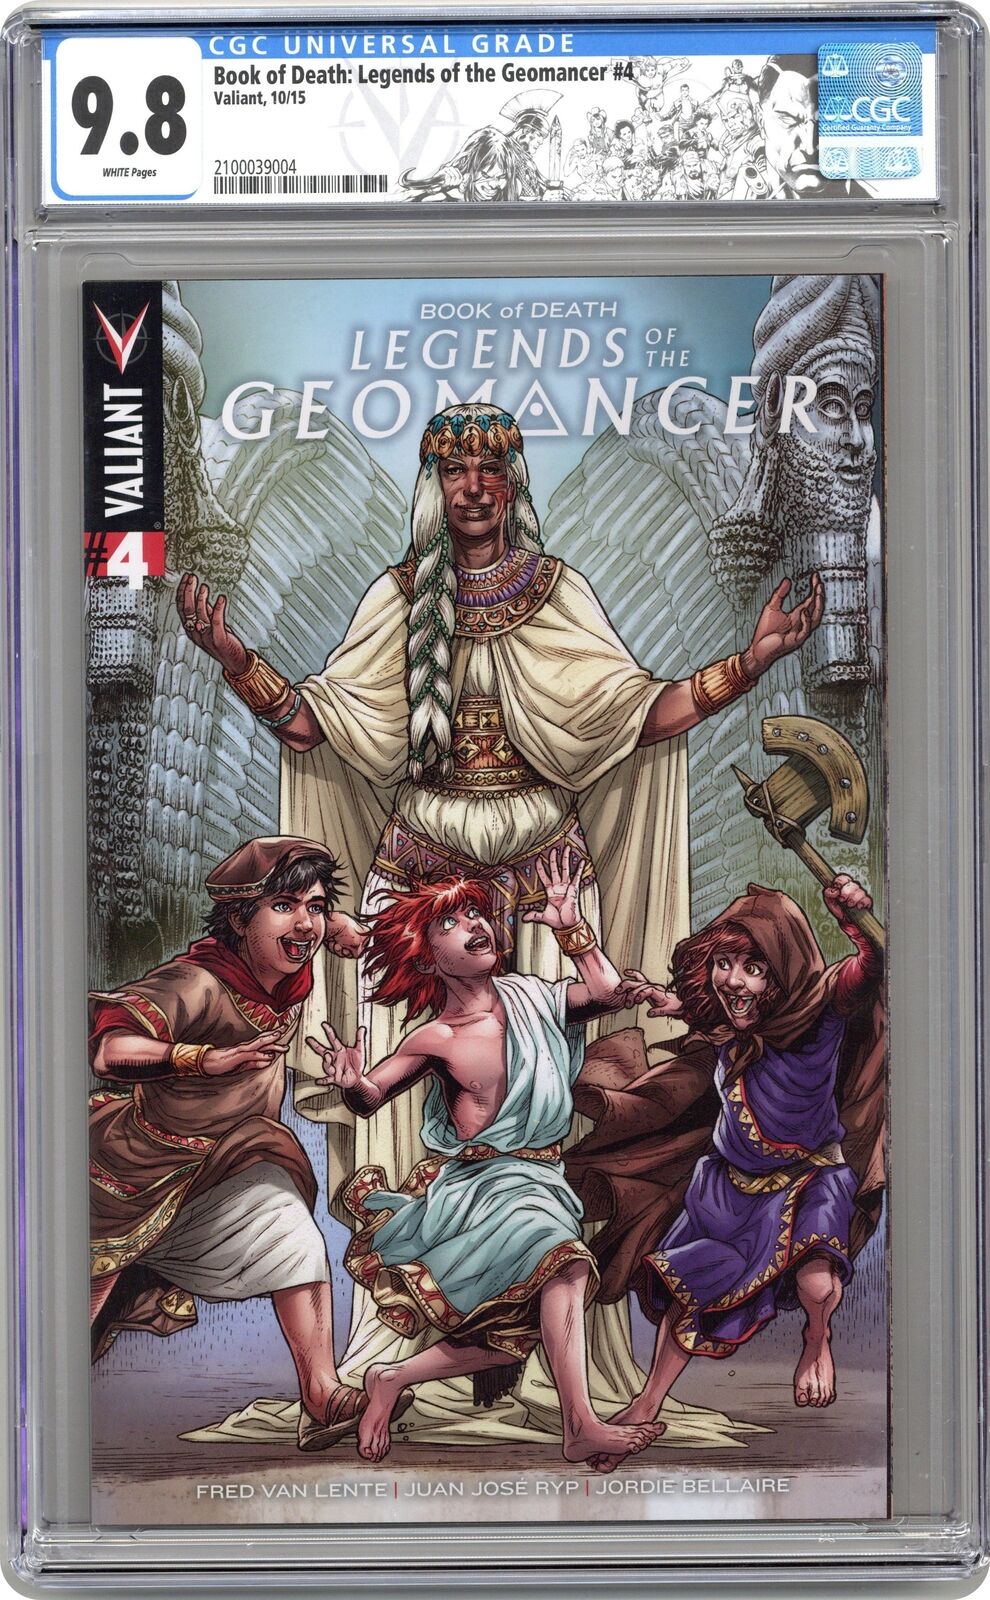 Book of Death Legends of the Geomancer #4 CGC 9.8 2015 2100039004